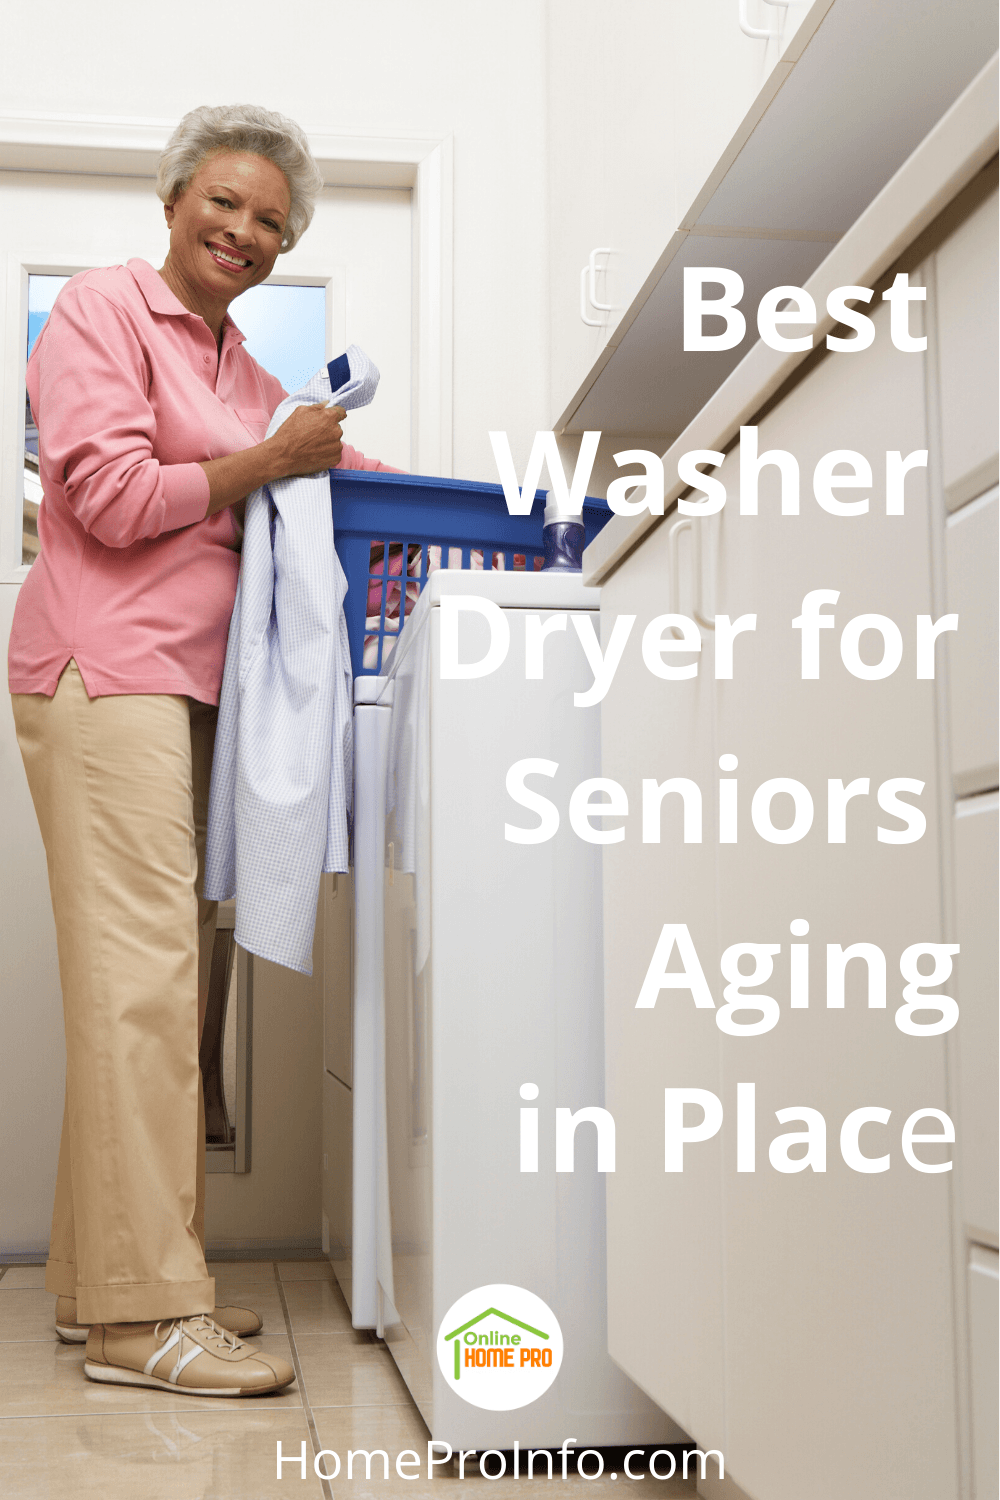 best washer dryer for seniors aging in place